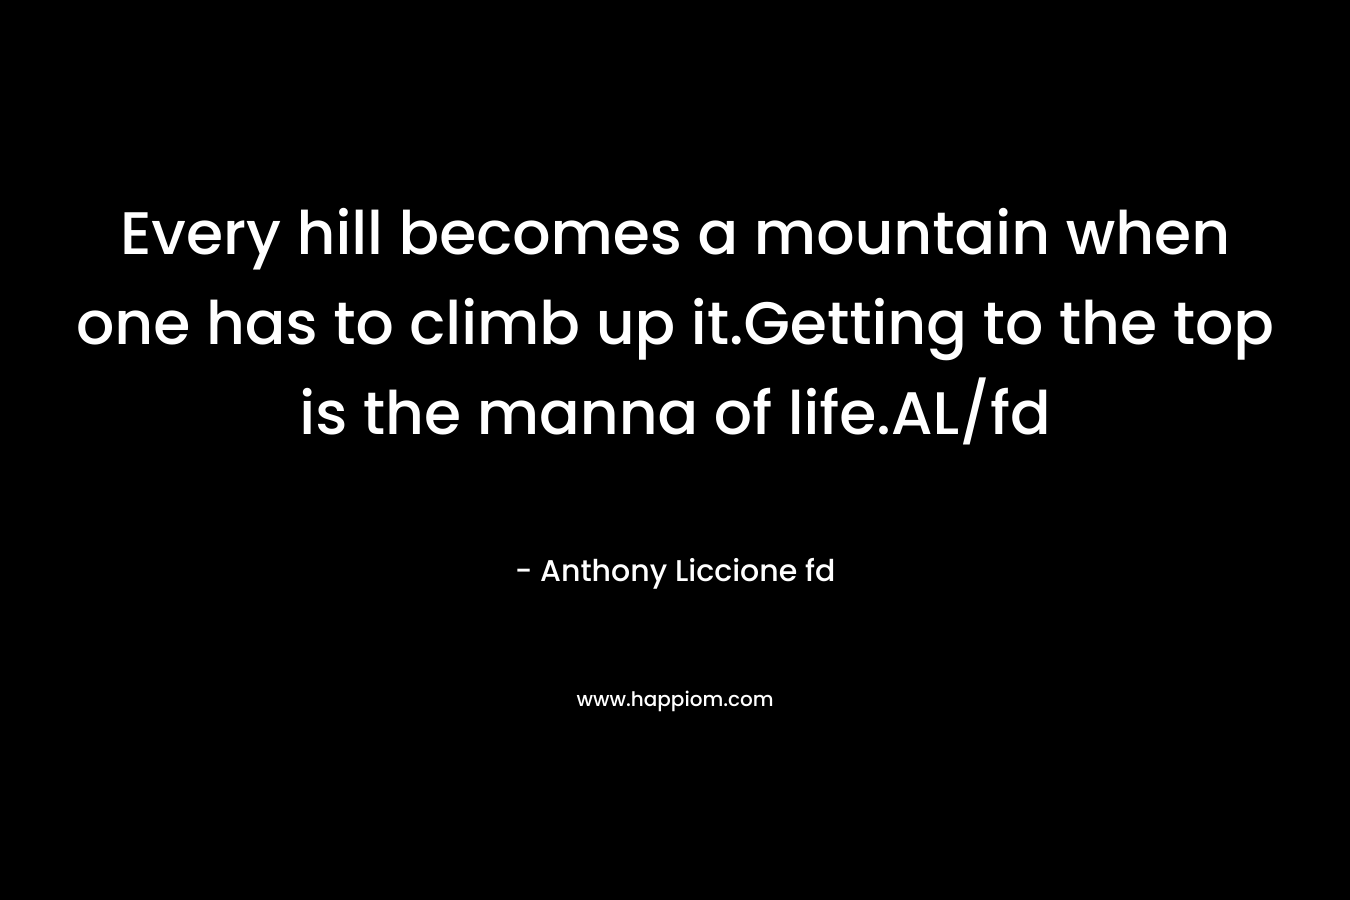 Every hill becomes a mountain when one has to climb up it.Getting to the top is the manna of life.AL/fd